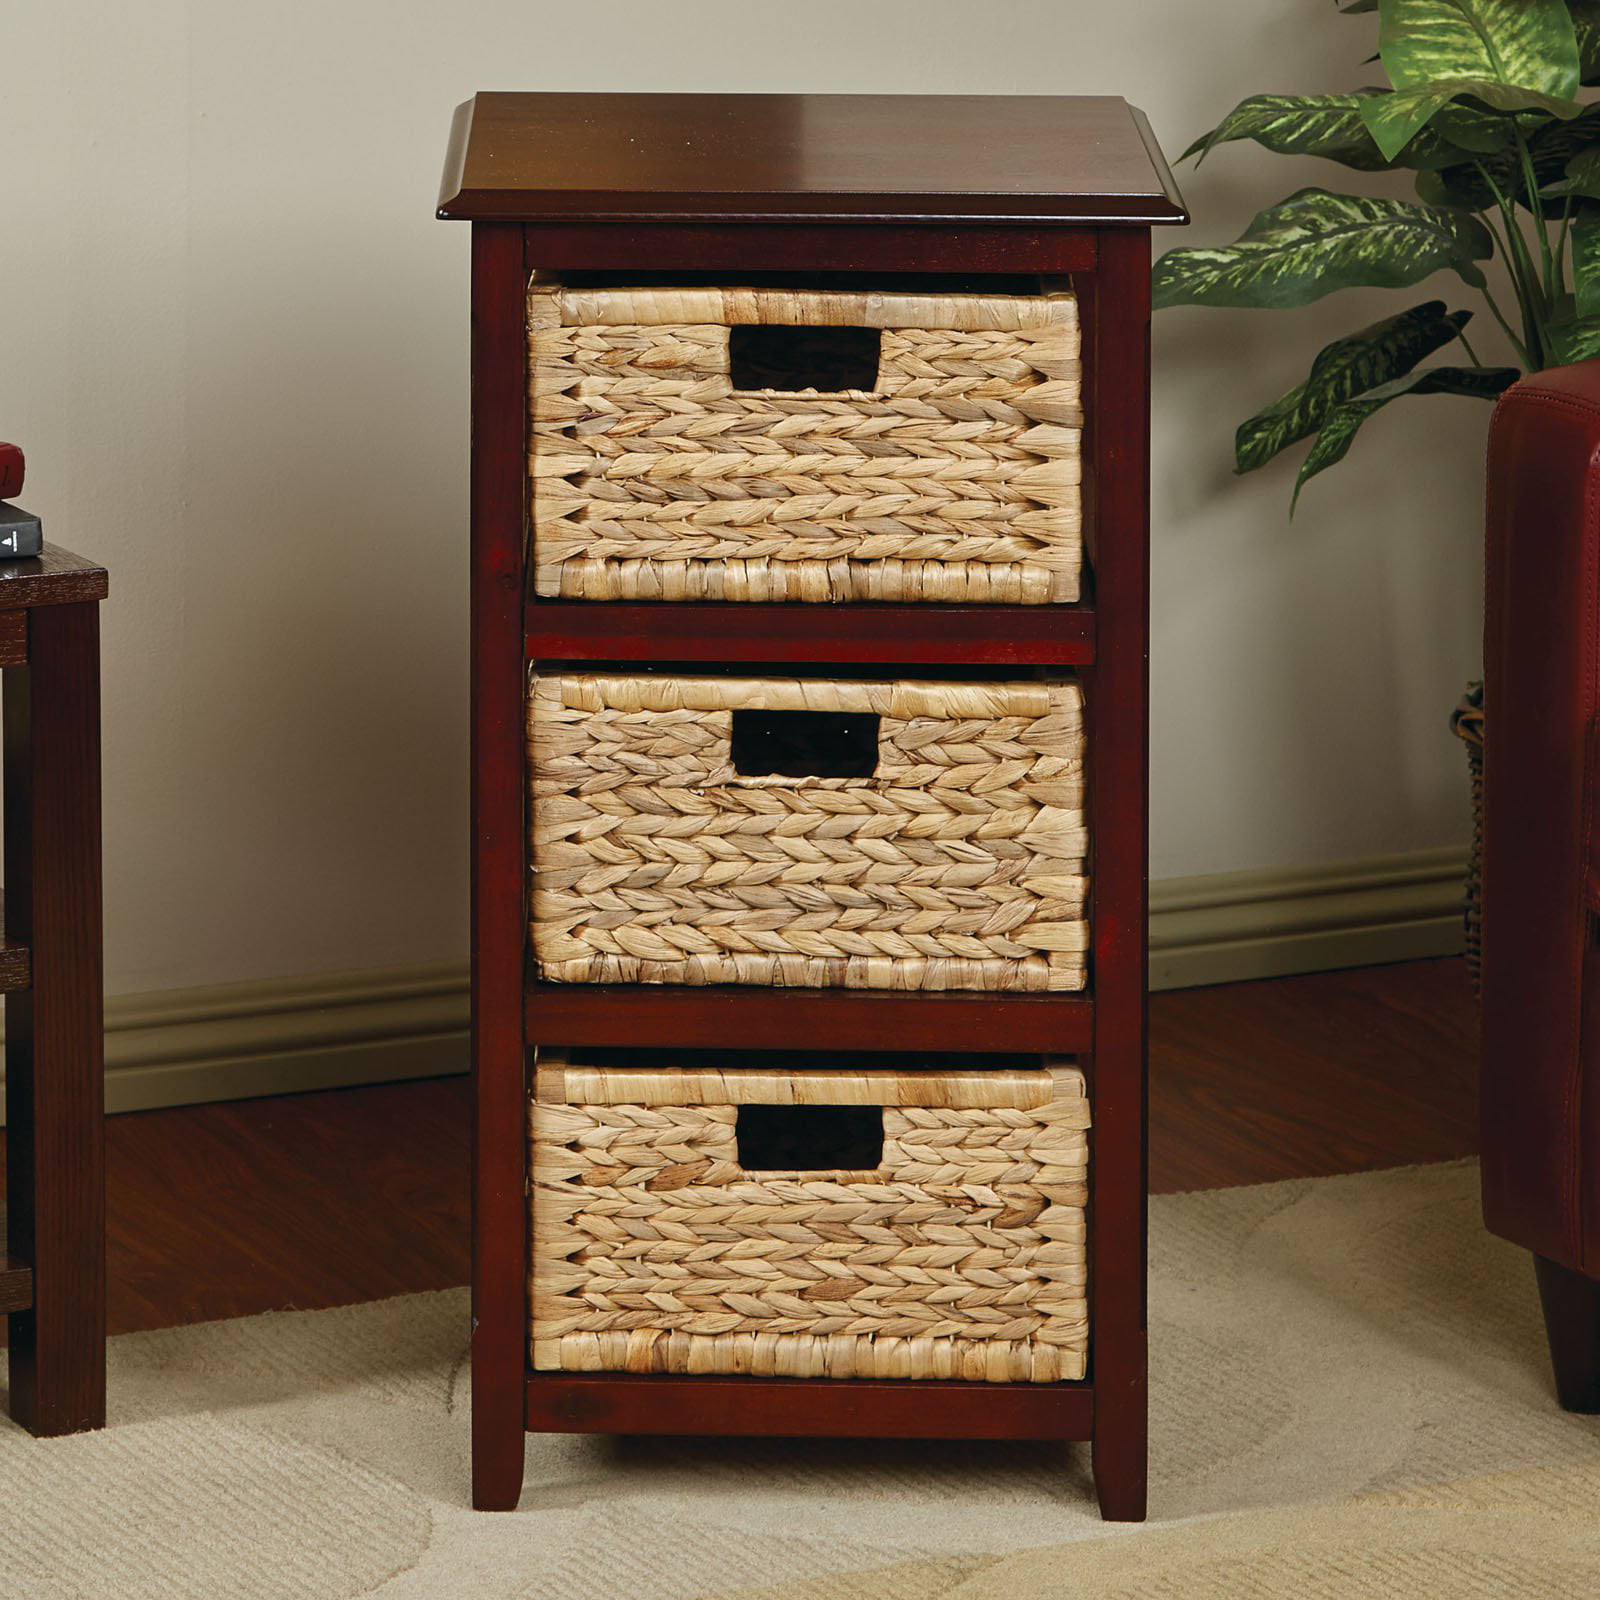 OSP Designs Office Star Seabrook 3-Tier Storage Unit with Natural Baskets Espresso